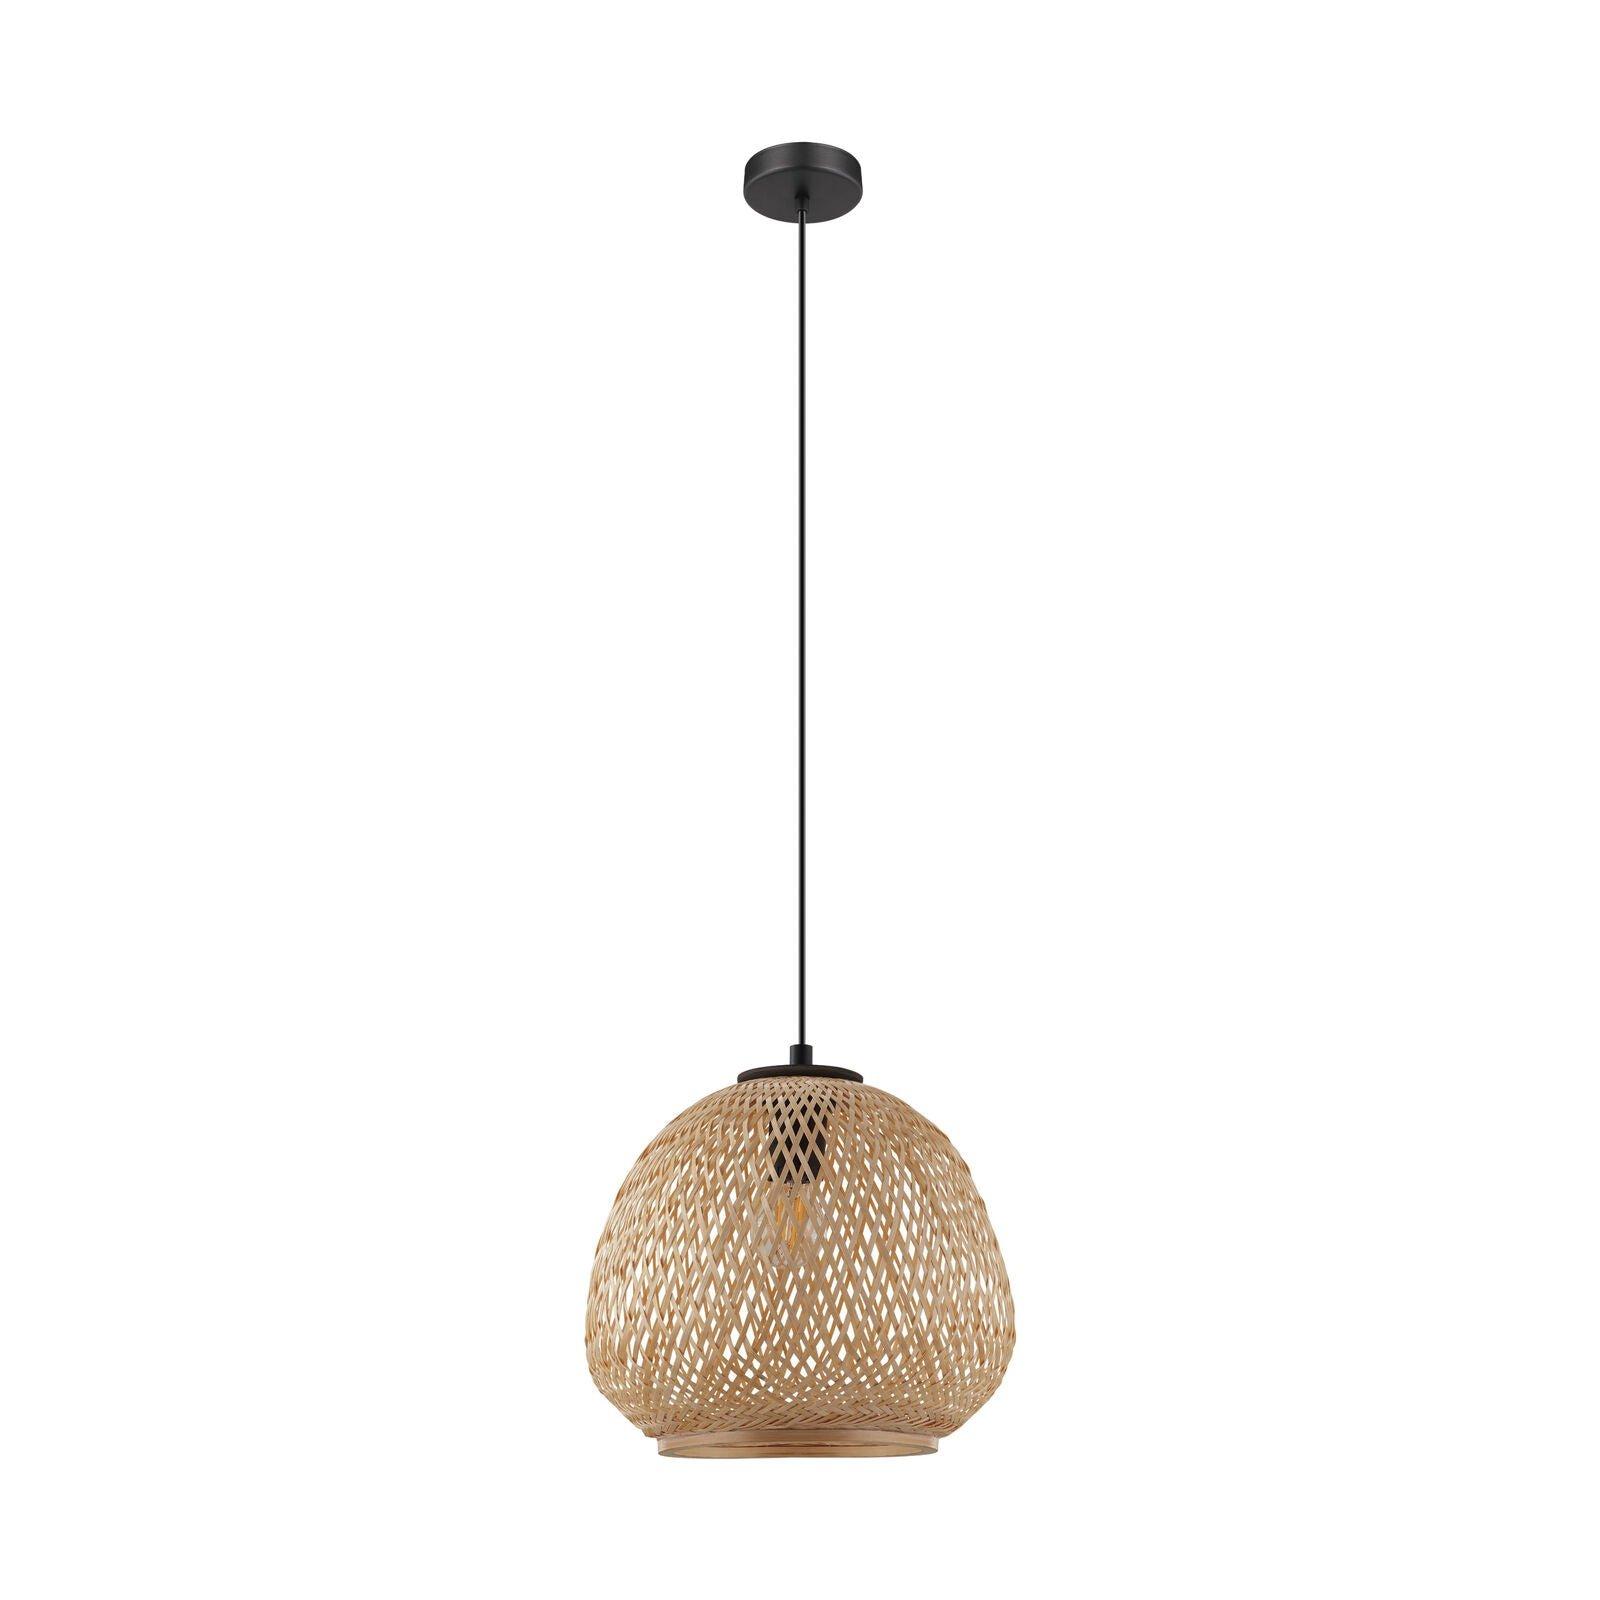 Hanging Ceiling Pendant Light Round Wicker Shade 1 x 40W E27 Hallway Feature